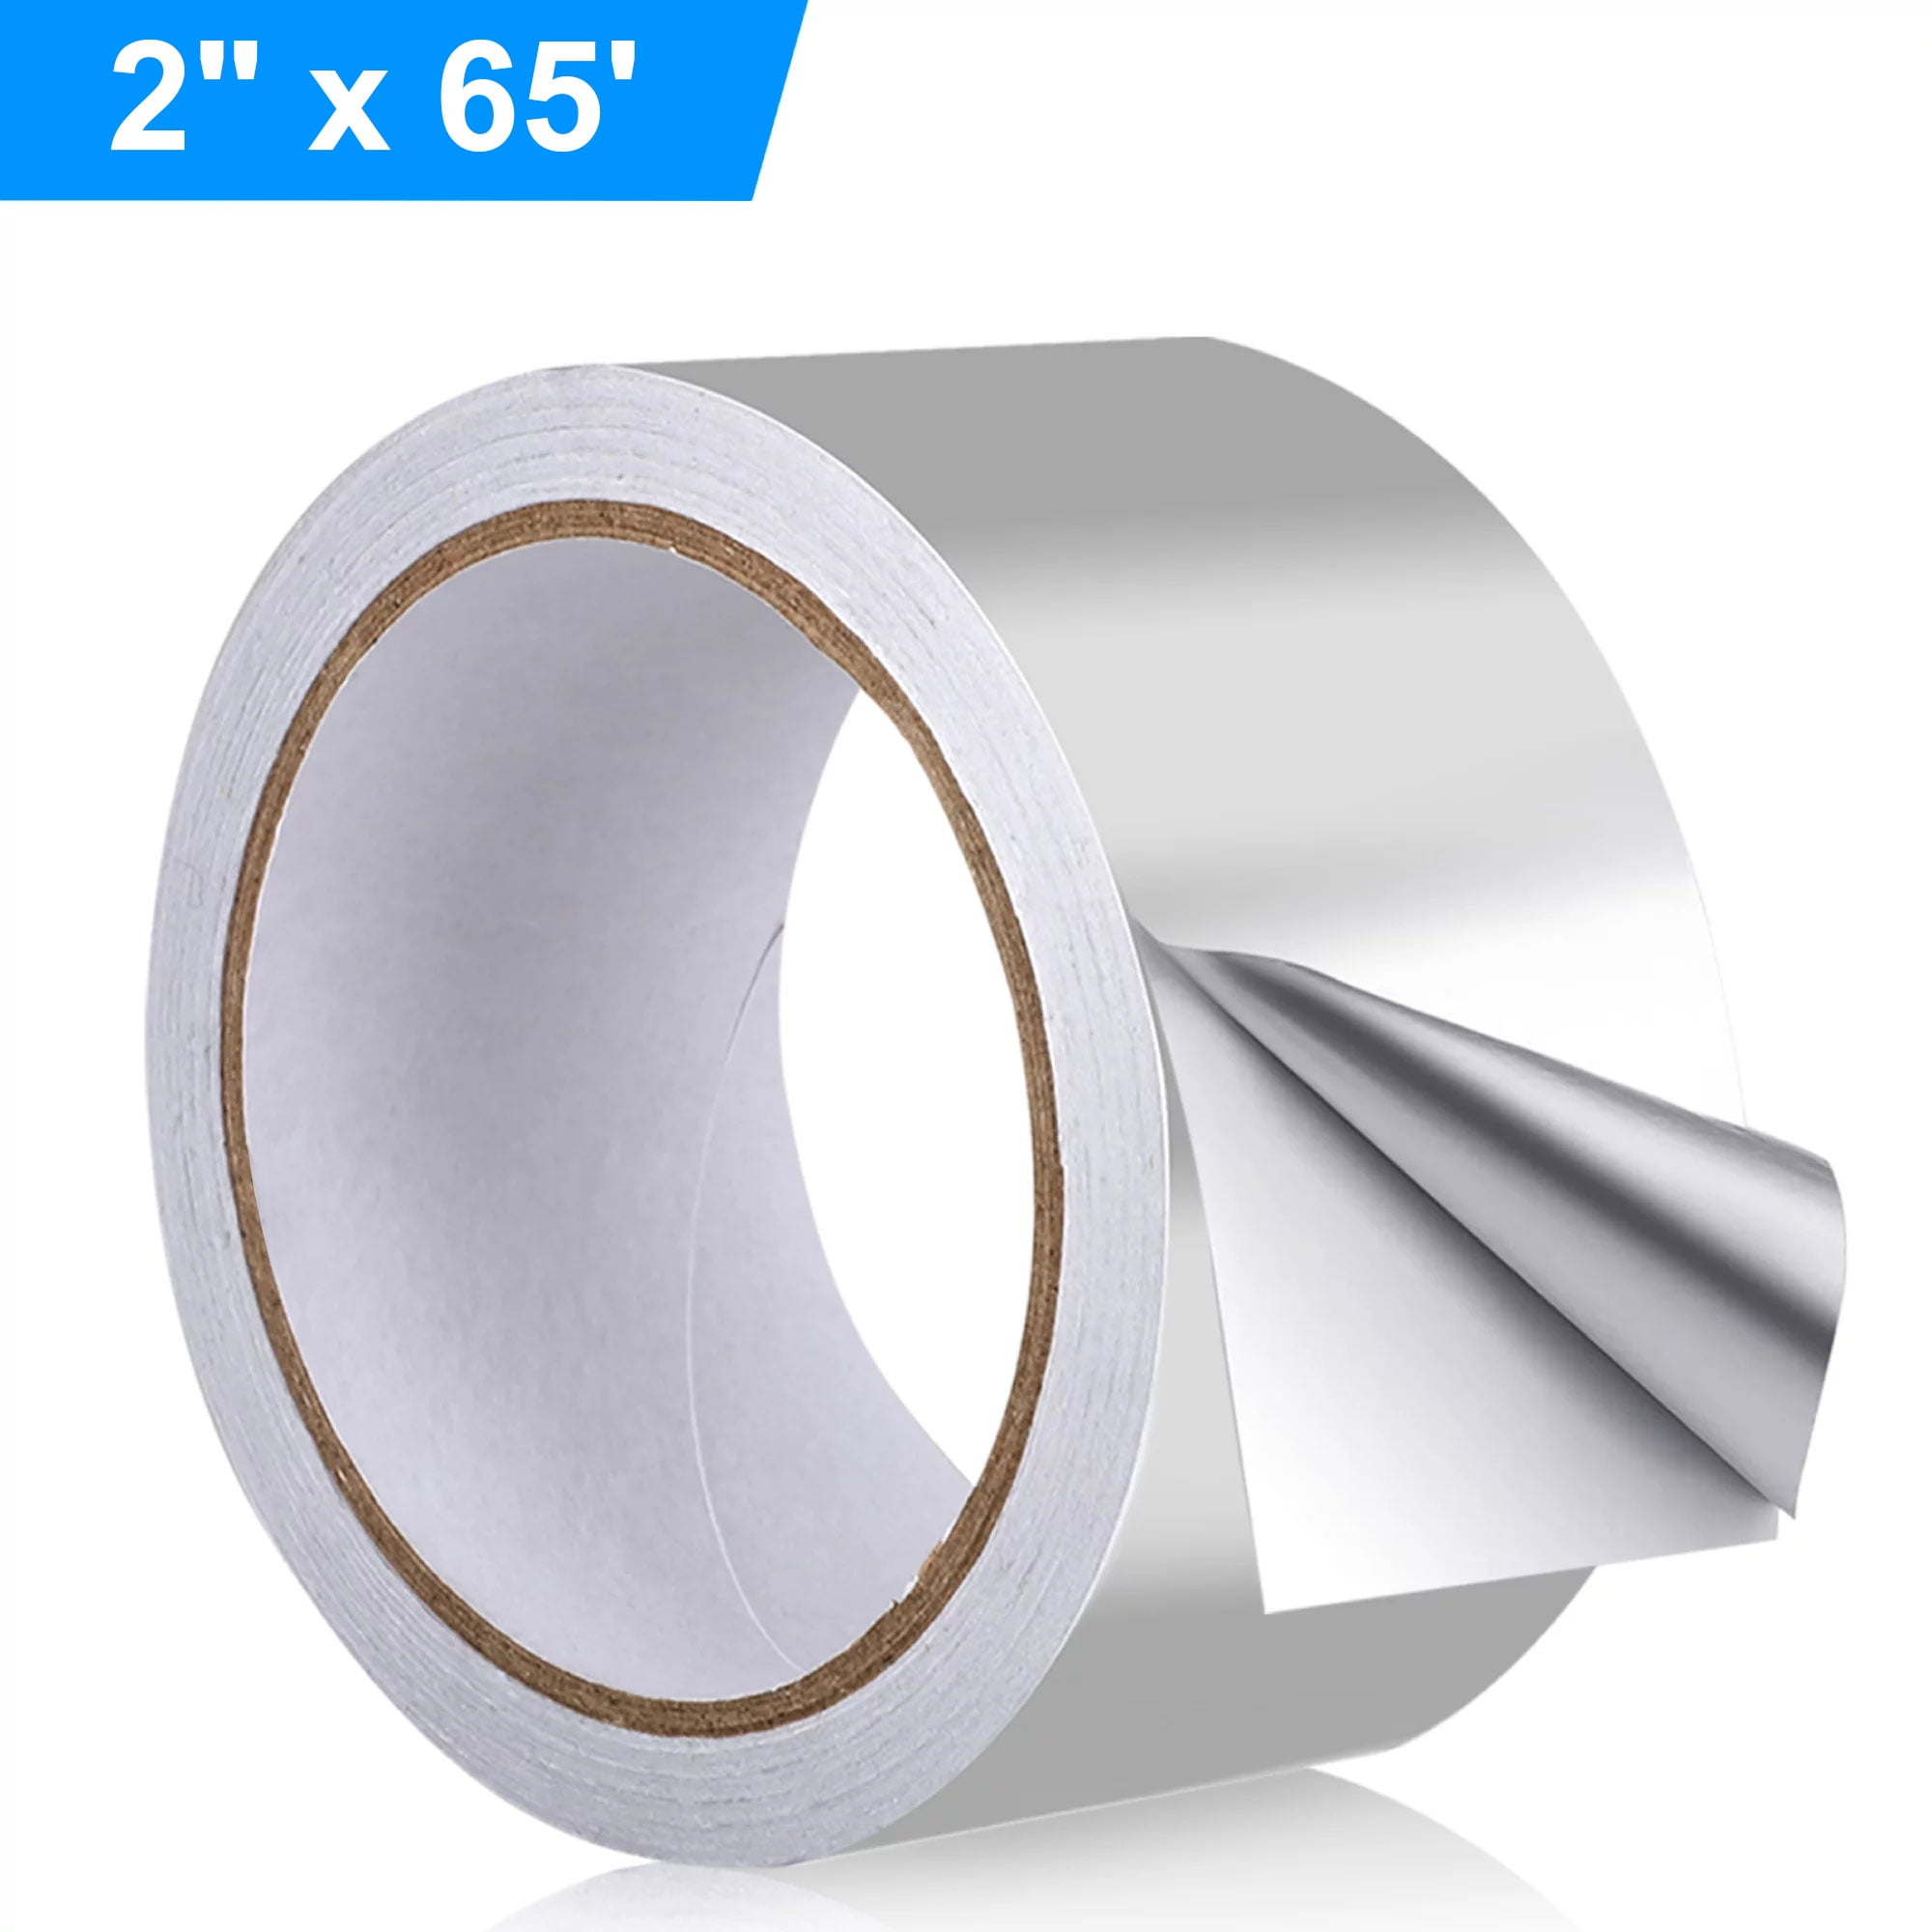 TSV 65' x 2 Aluminum Foil Tape, Silver Metal Tape Heat Shield HVAC Tape,  A/C Sealing Adhesive Tape for Repairing Cold Air Ducts, Duct Insulation